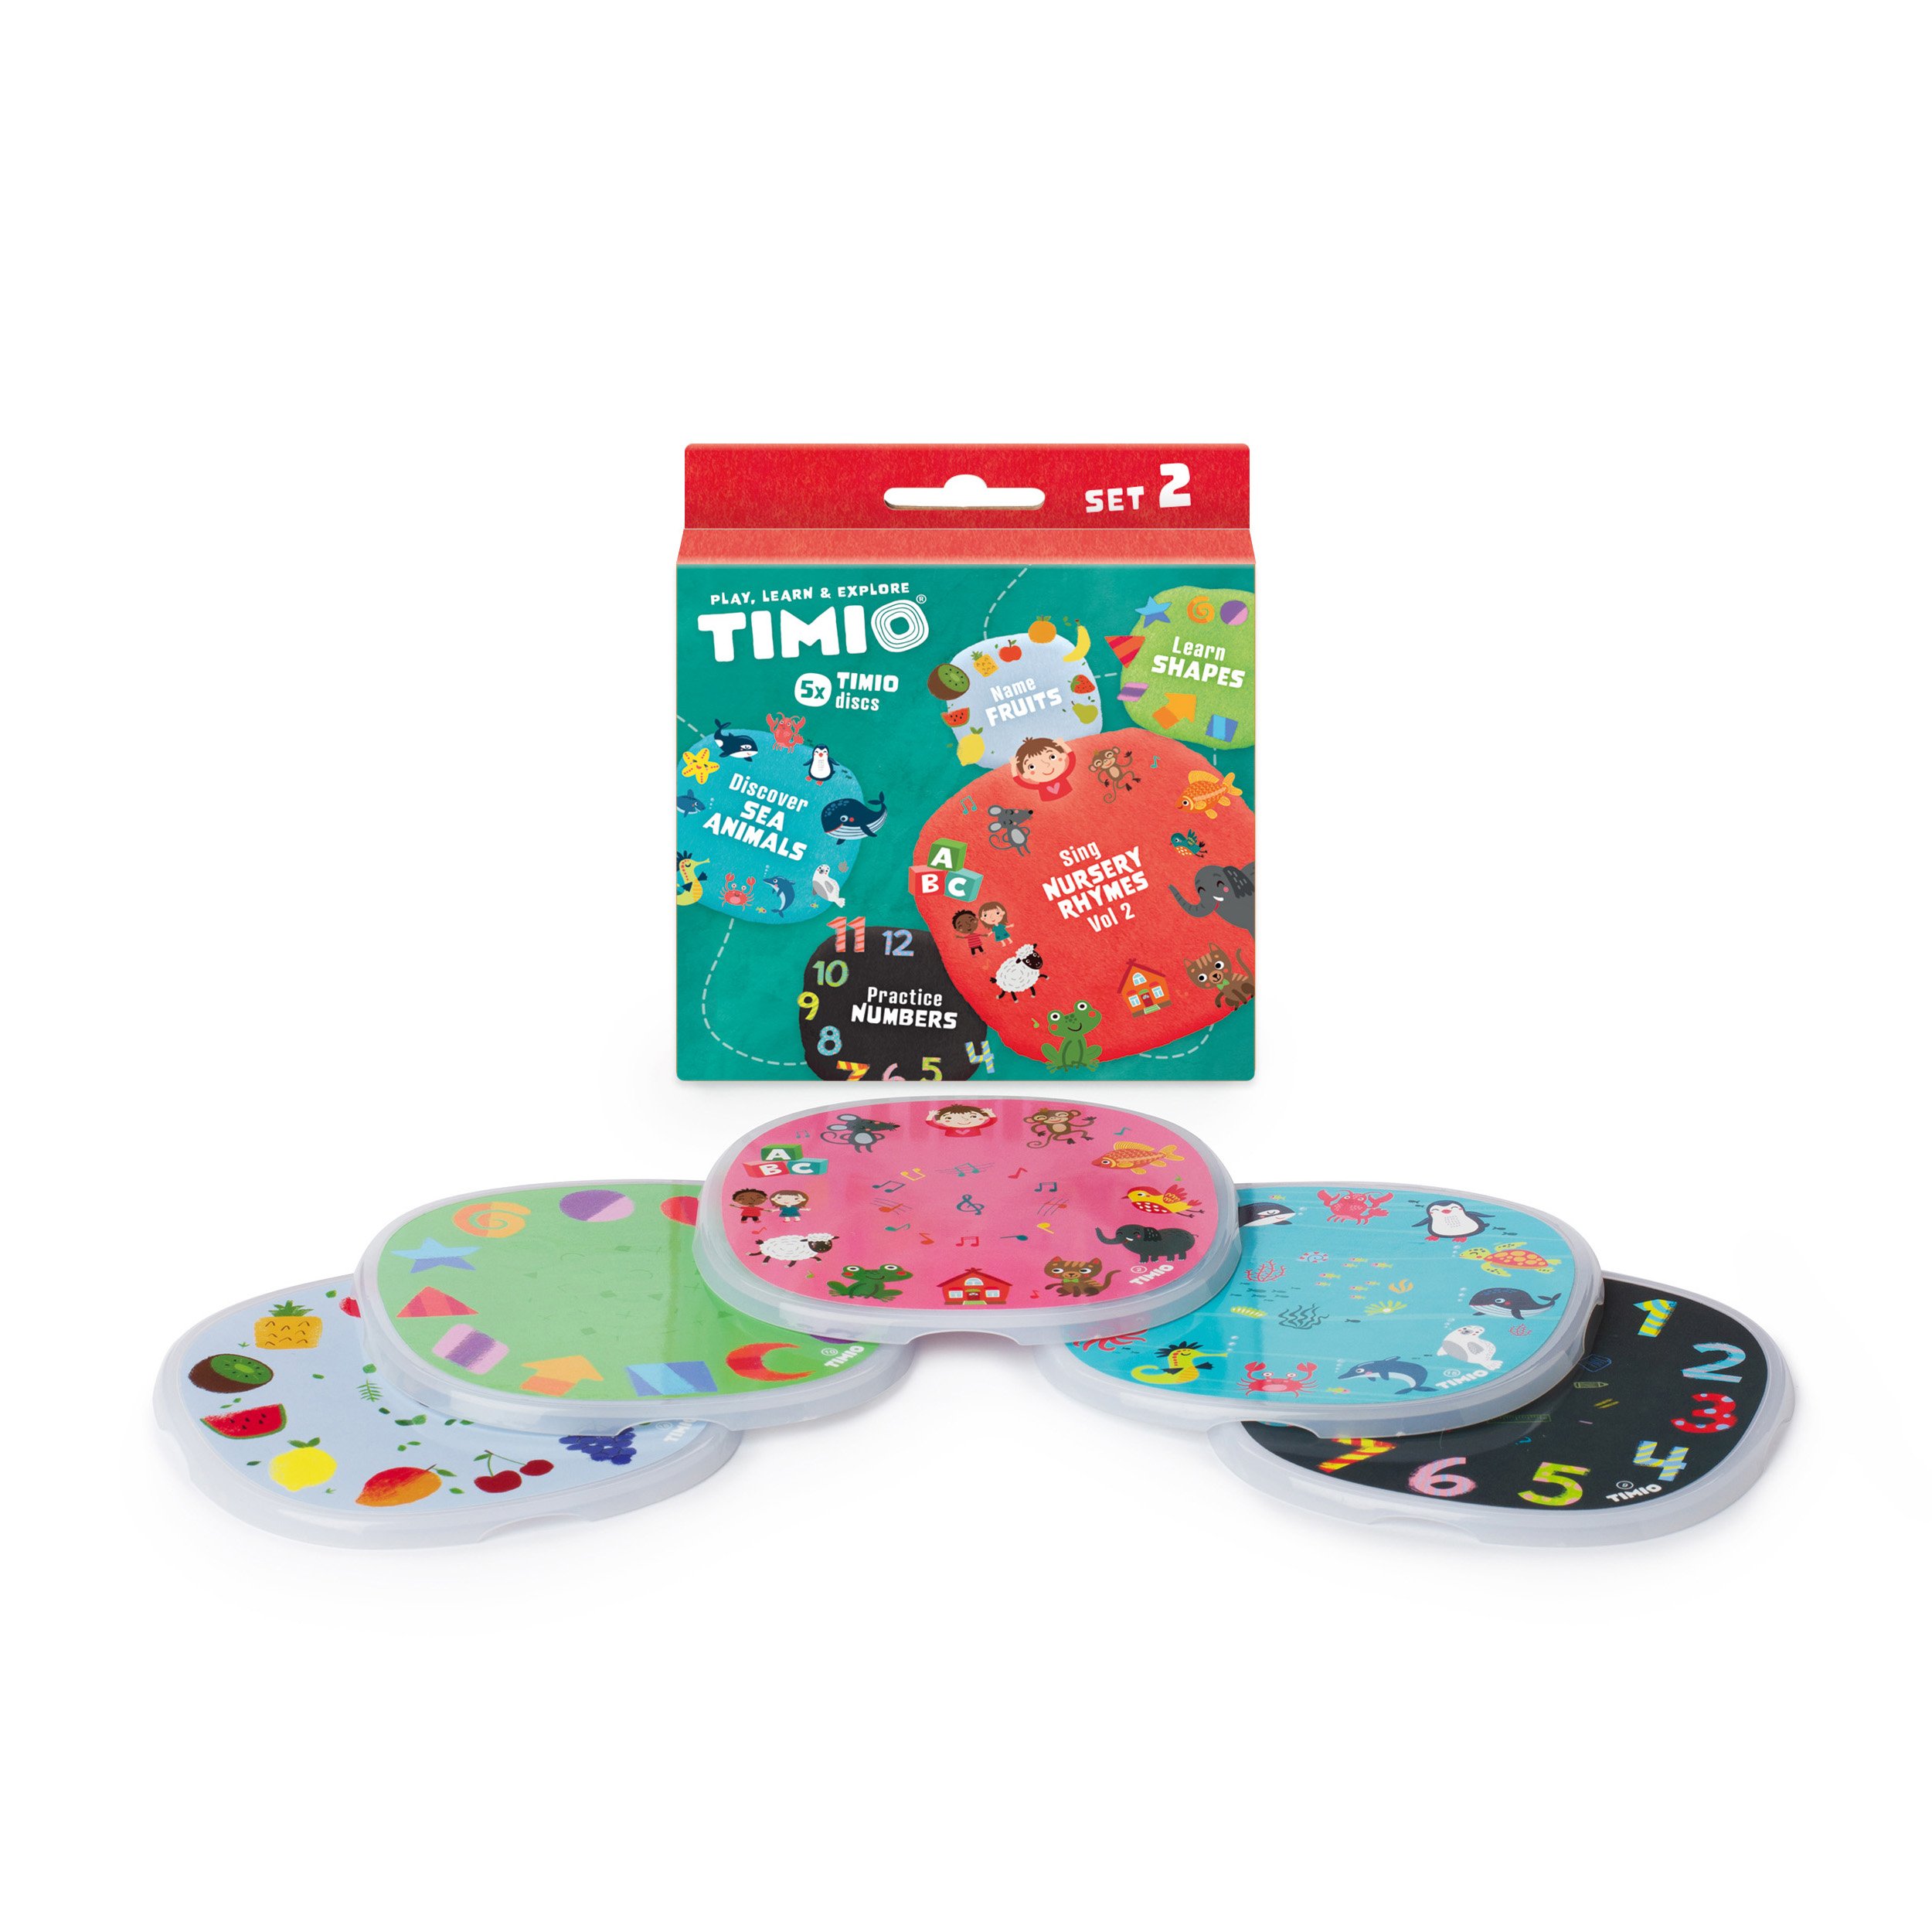 Timio - Disc Set 2 - Numbers, Nursery Rhymes, Sea Animals, Shapes and Fruits - (TM-TMD-02E) - Leker